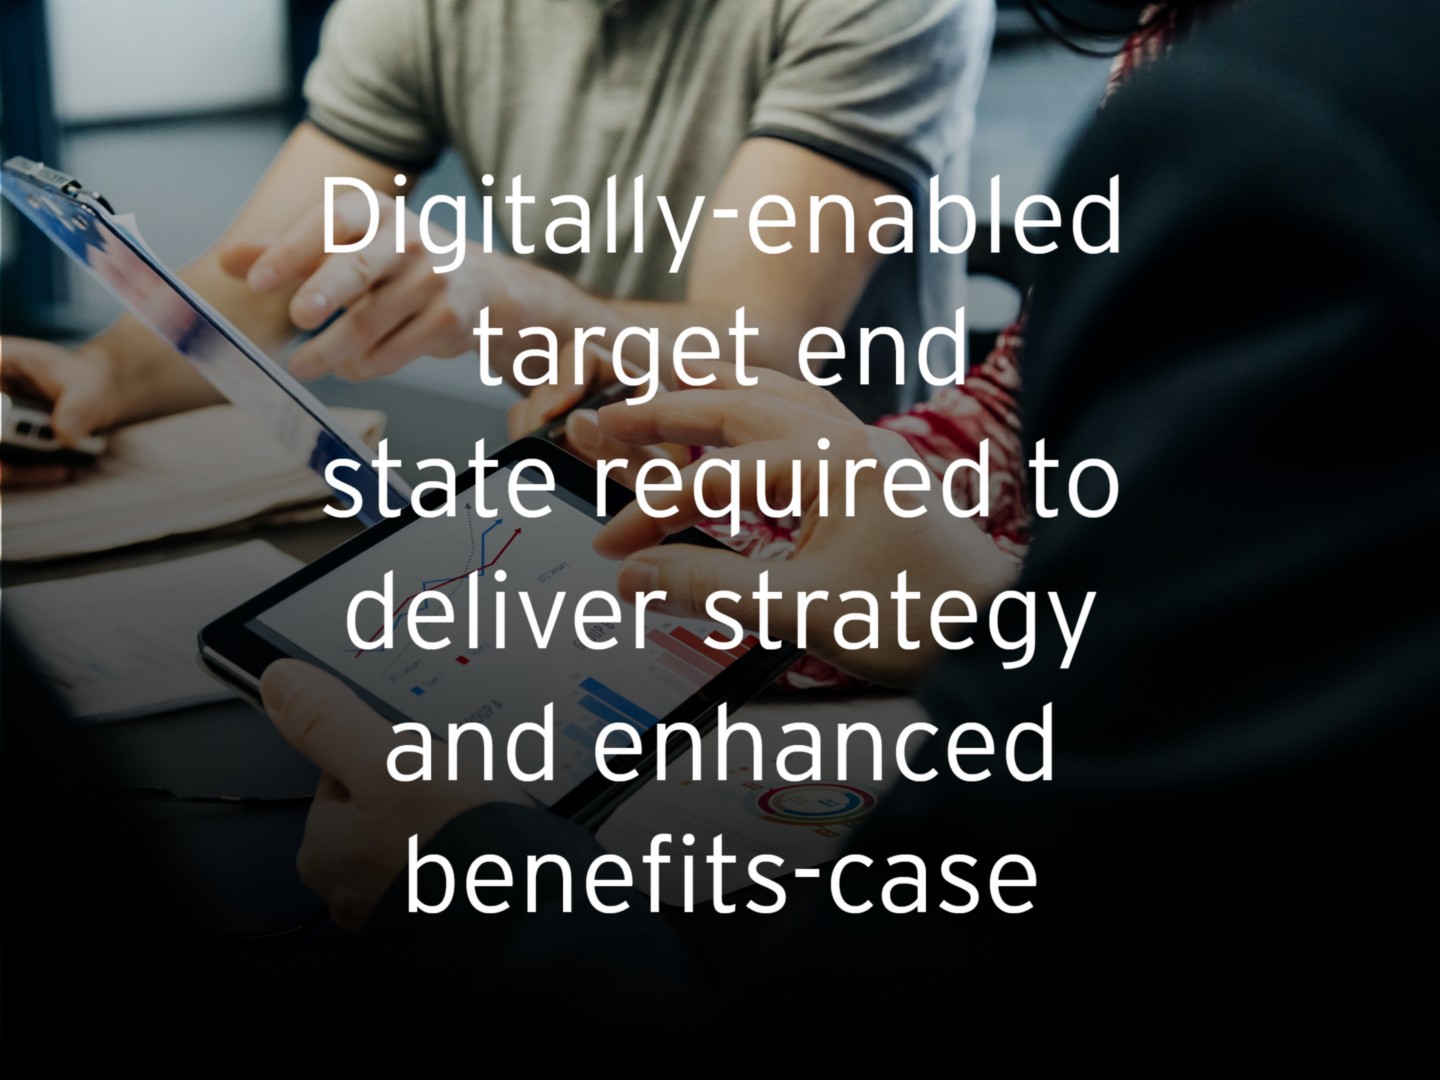 Digitally-enabled target end state required to deliver strategy and enhanced benefits-case